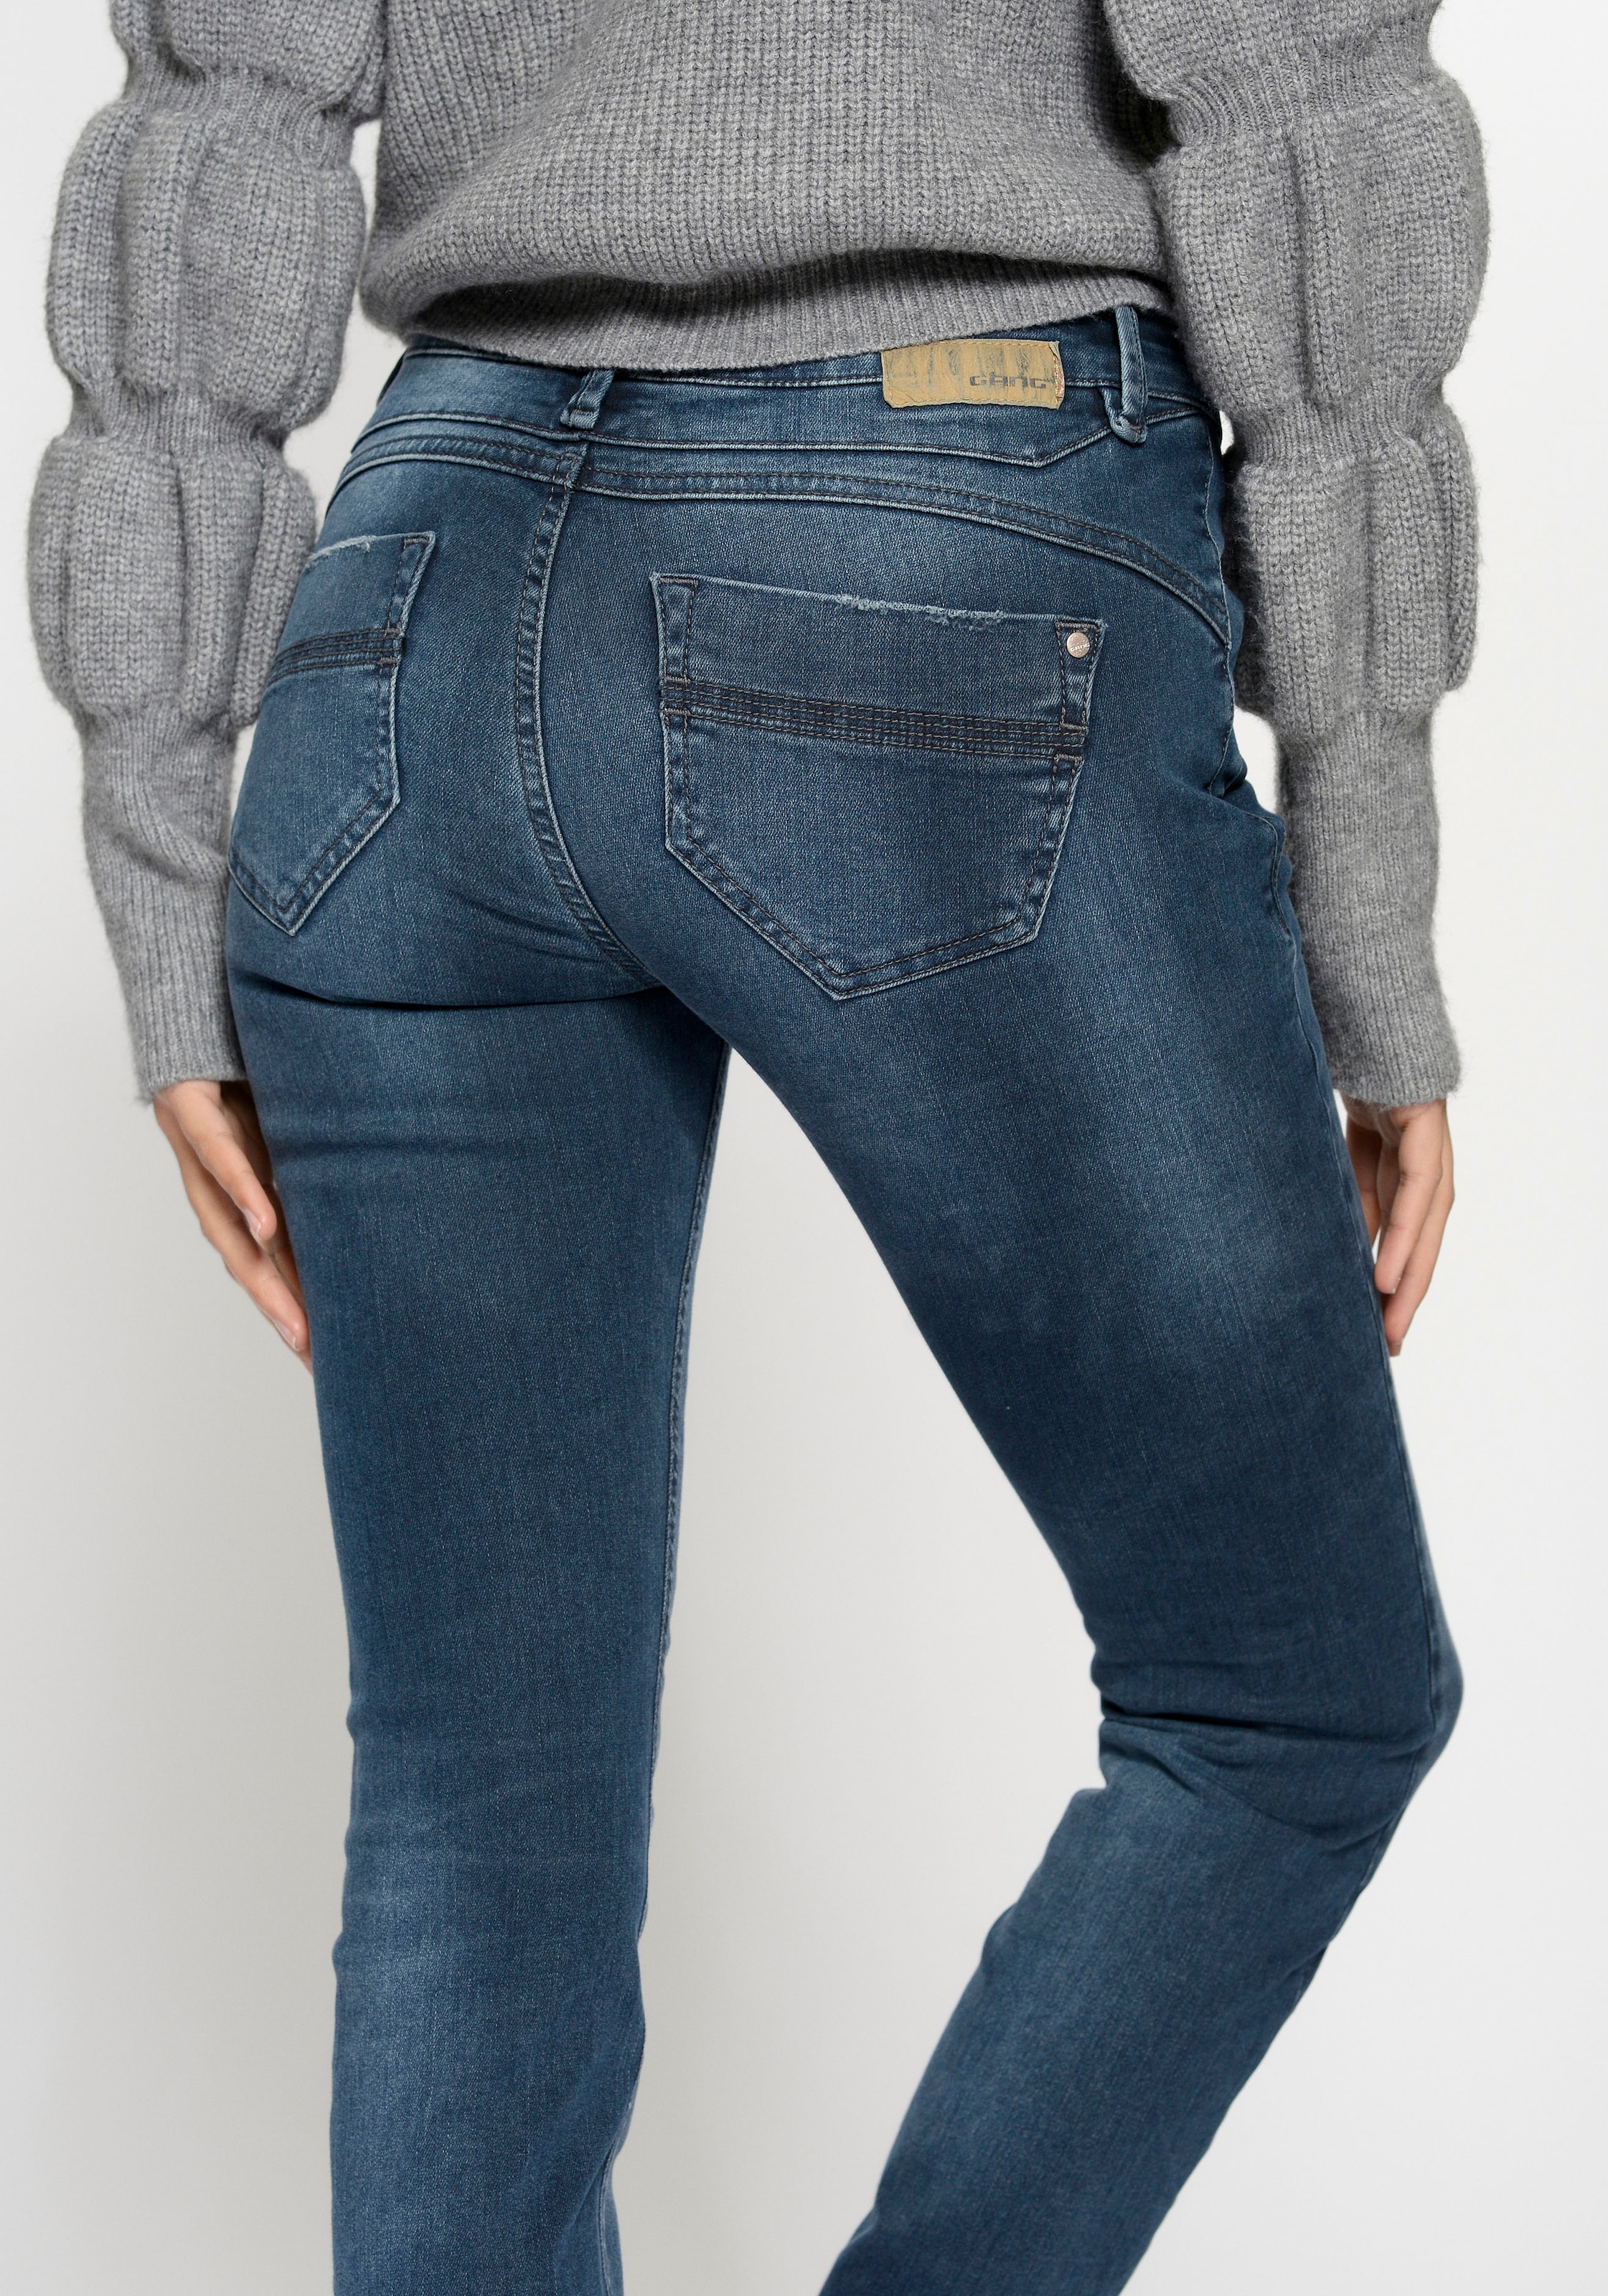 »94 OTTO bei Nele« online Skinny-fit-Jeans GANG